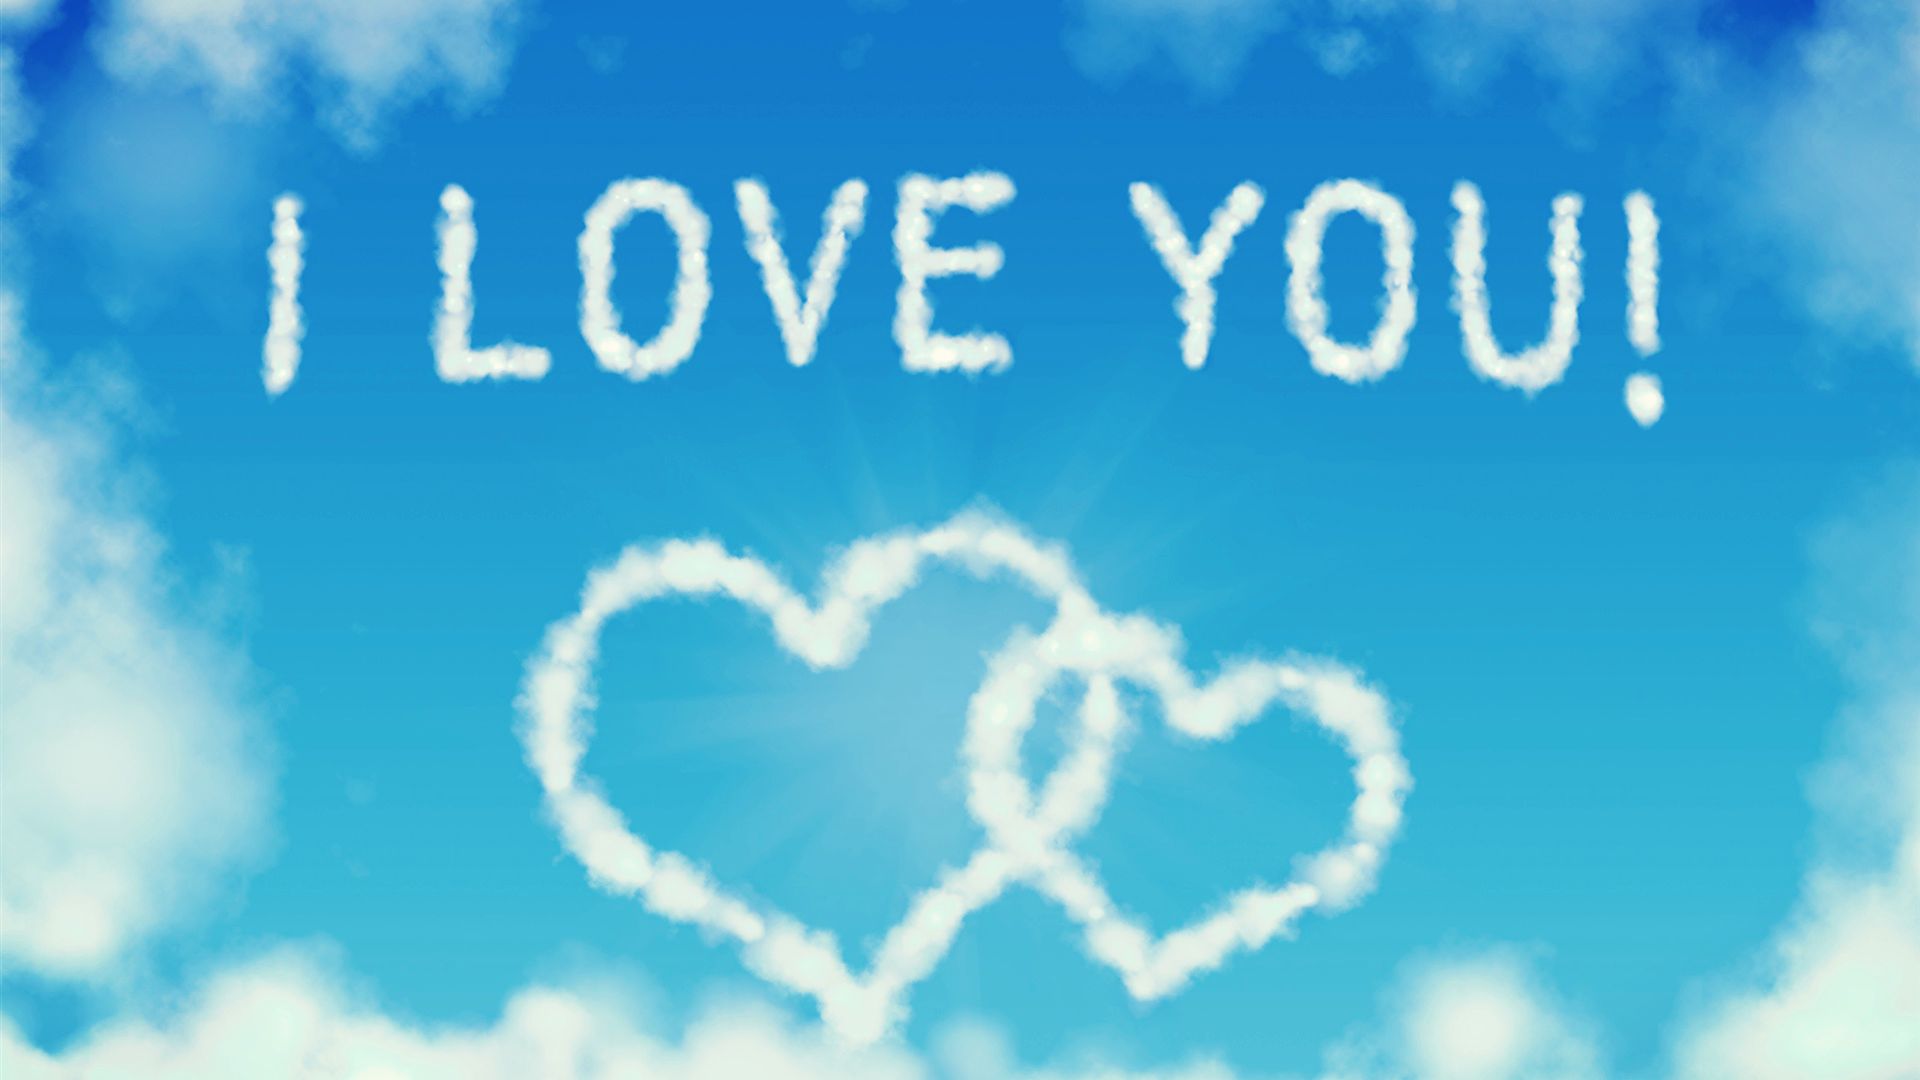 I Love You Wallpaper HD Wallpapers, Backgrounds, Images, Art Photos